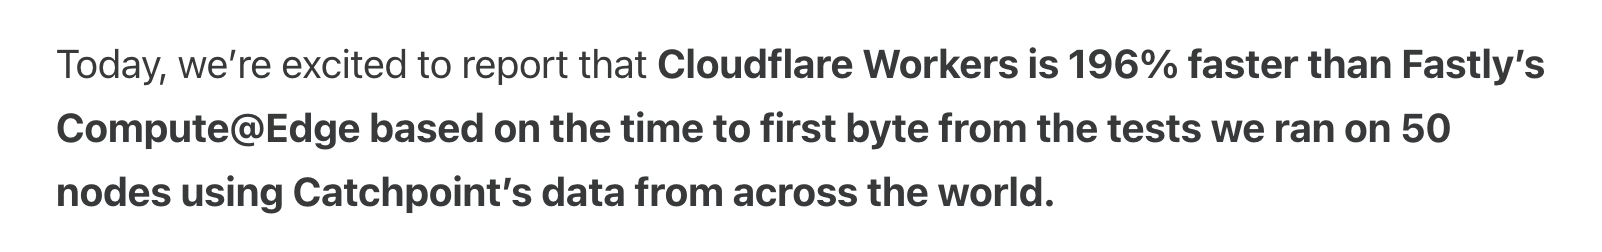 Cloudflare's claim to be 196% faster than Compute@Edge